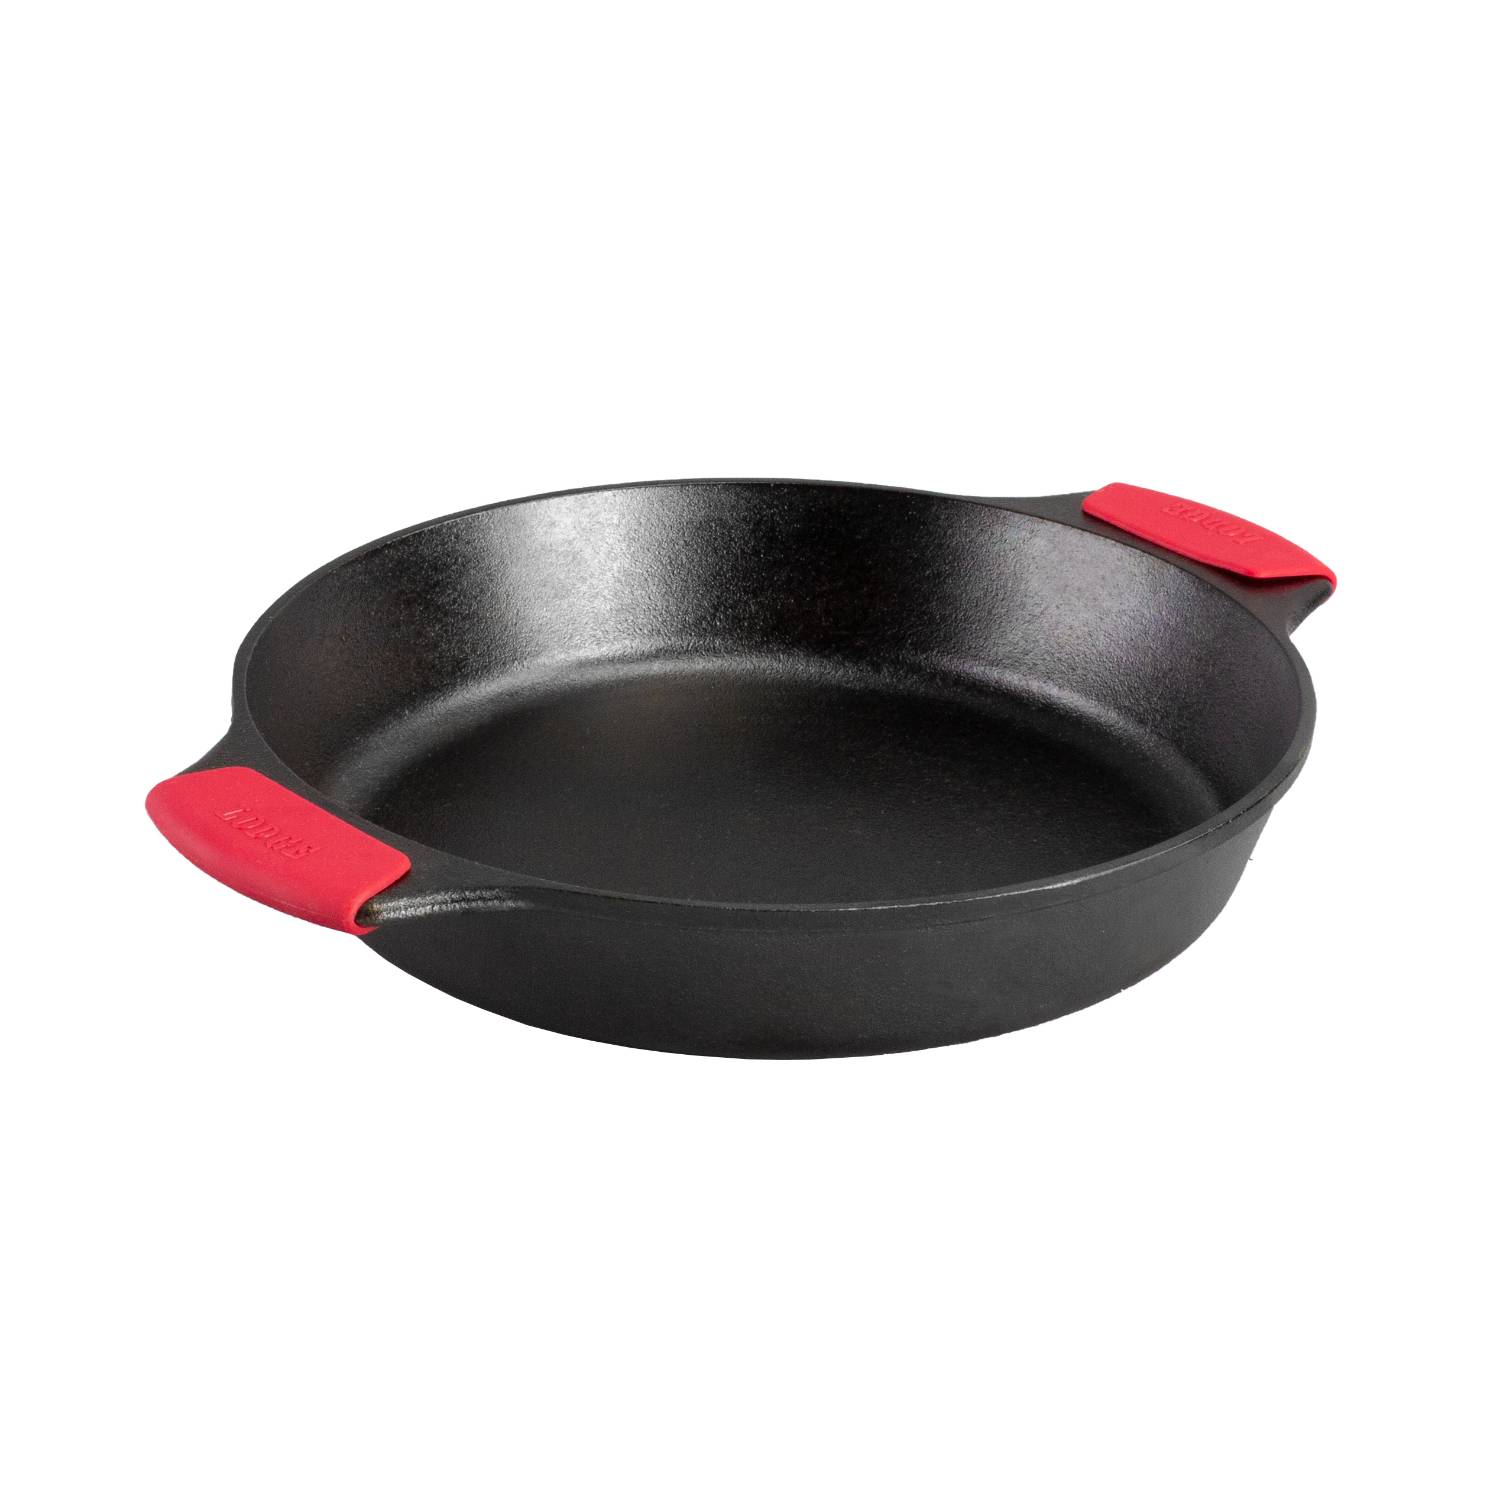 10.25-Inch/26 cm Cast Iron Skillet Set, Silicone Handle Holders